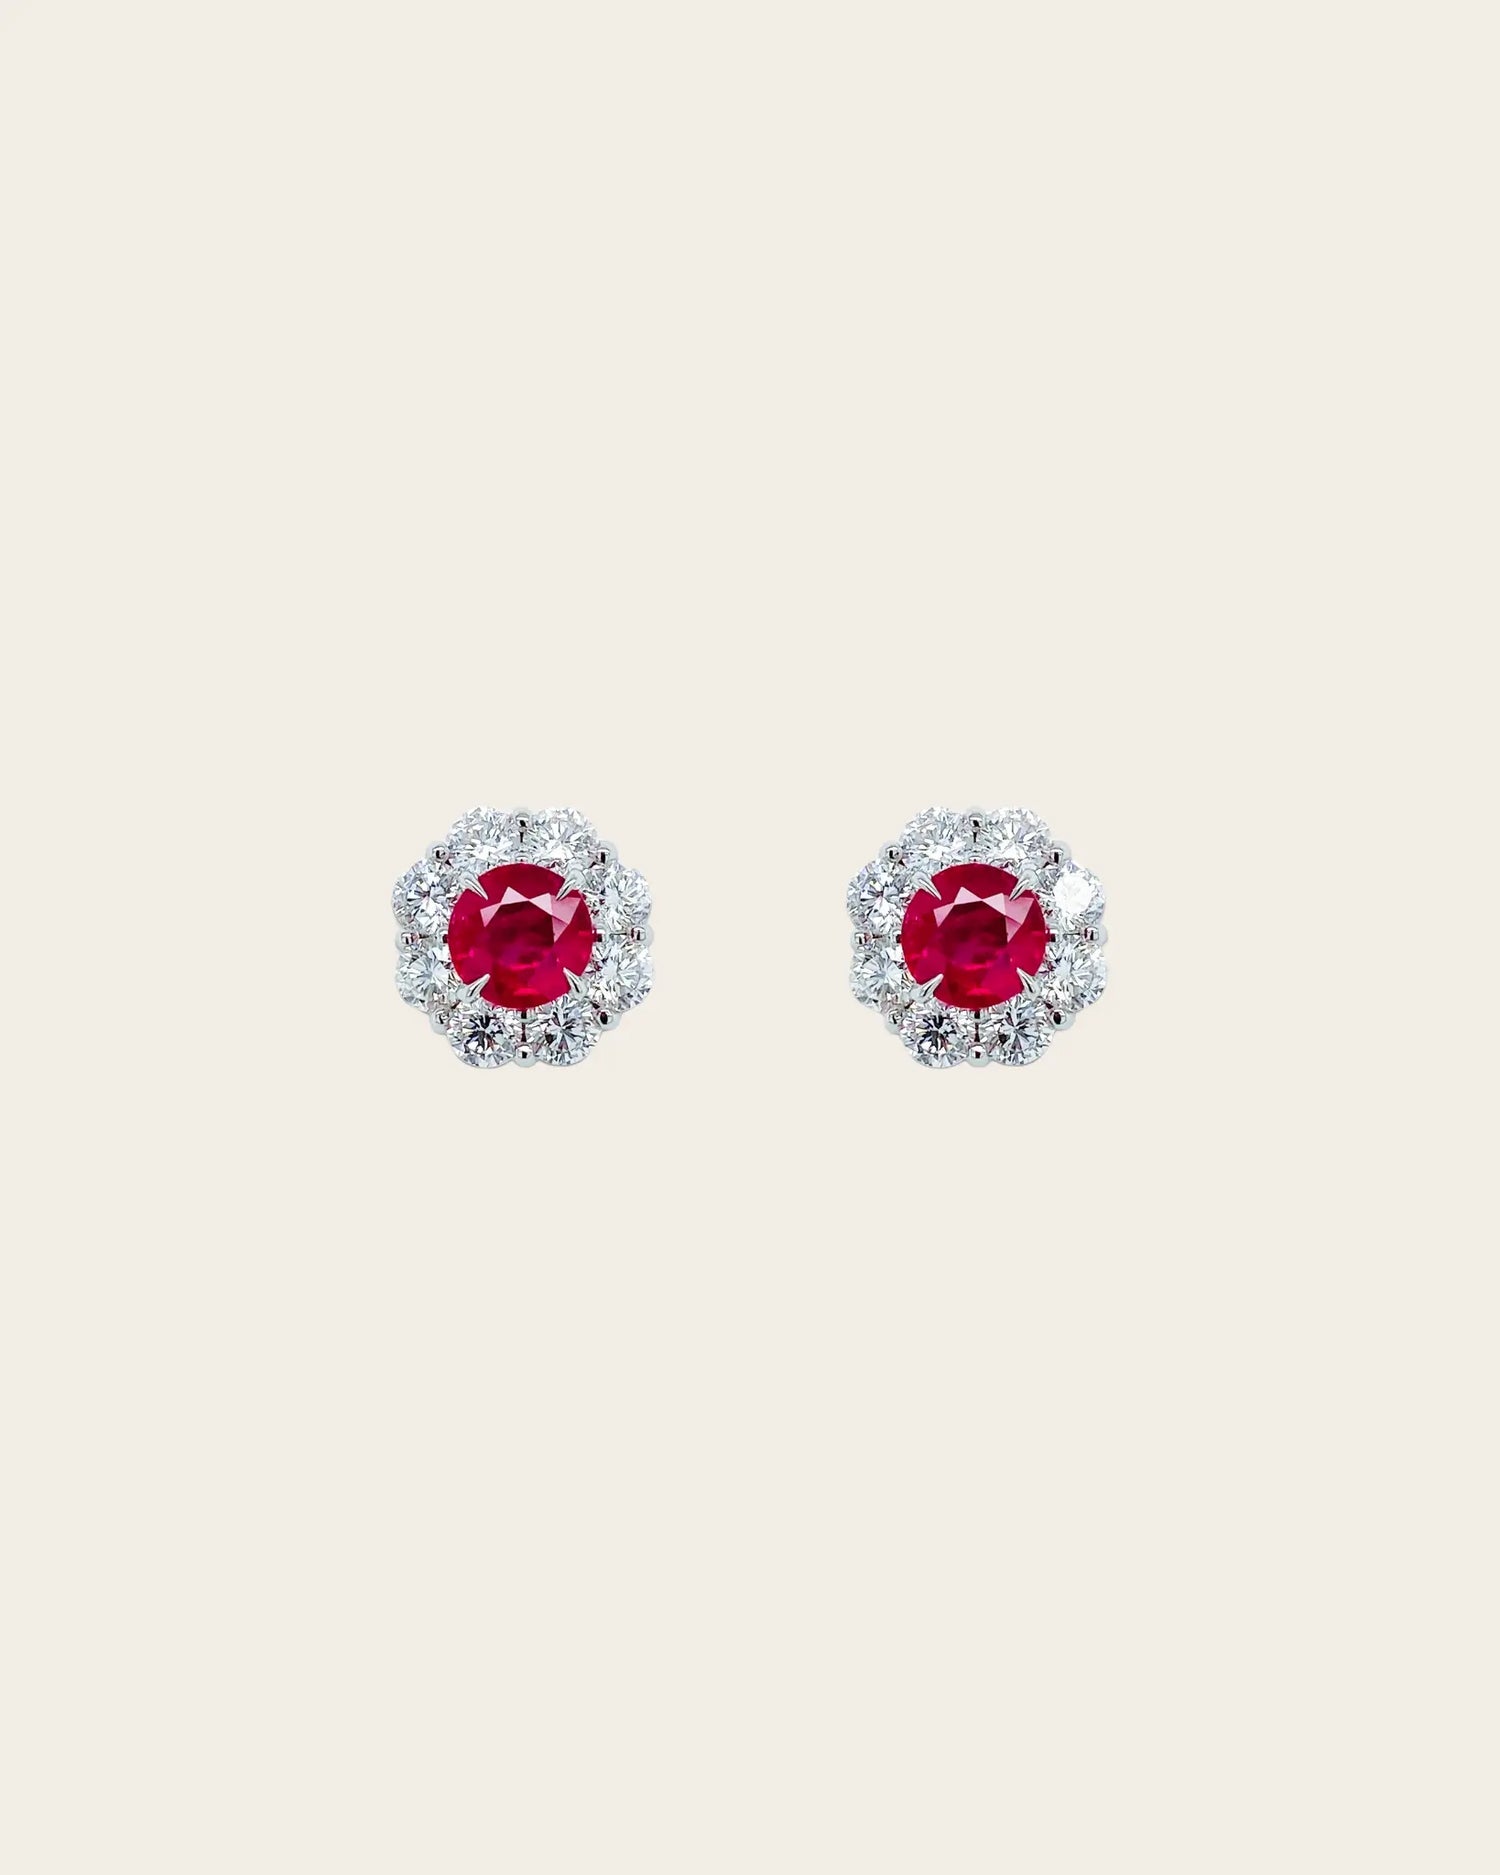 One of a Kind Ruby and Diamond Earrings One of a Kind Ruby and Diamond Earrings Bayco Bayco  Squash Blossom Vail